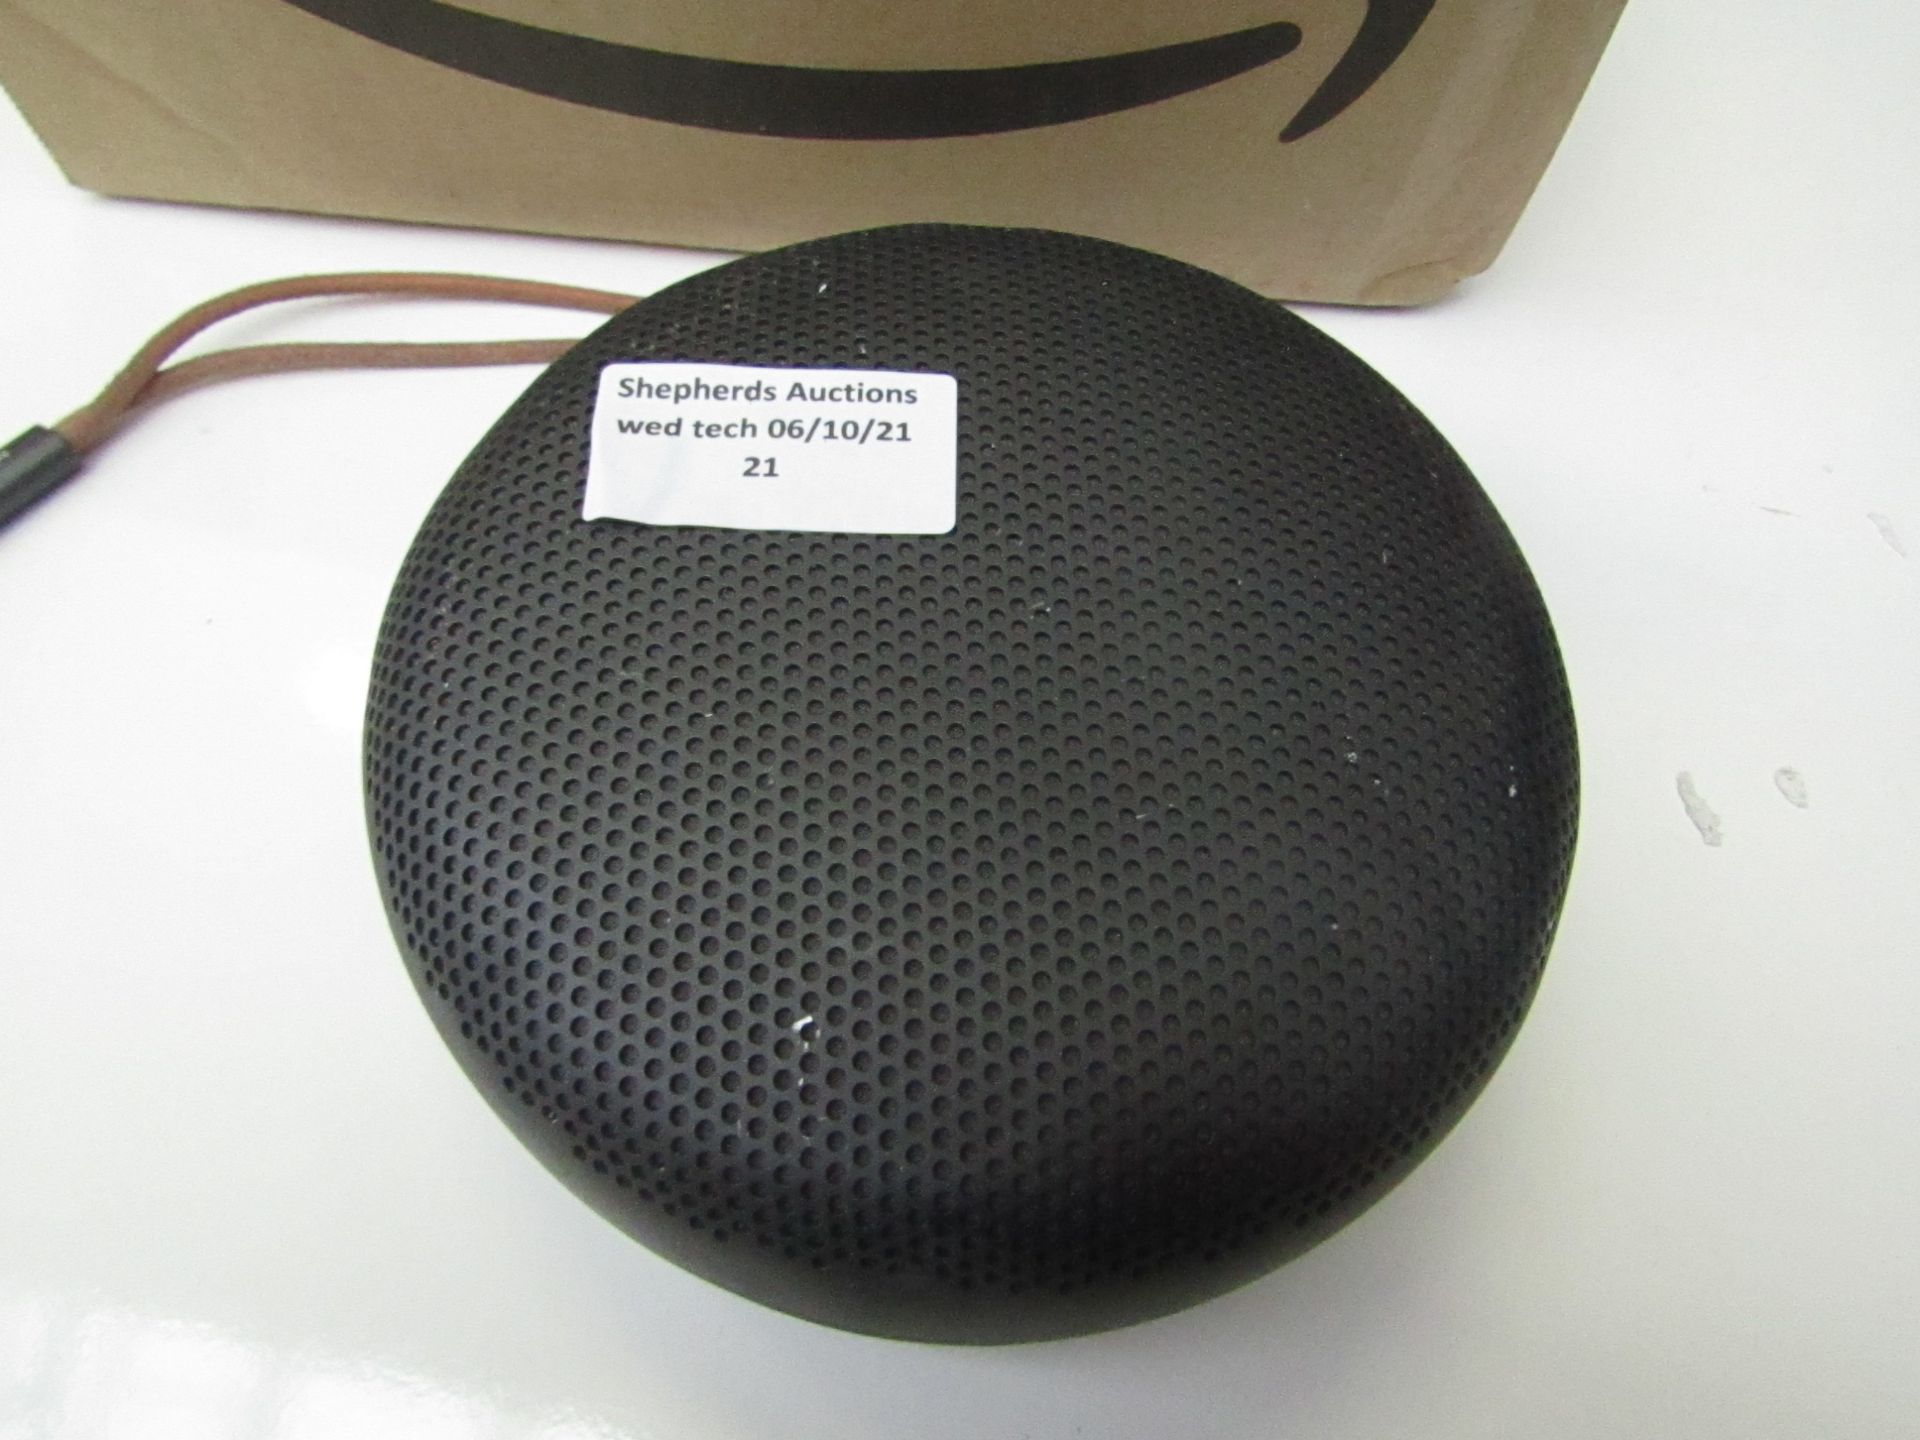 Bang and Olufsen A1 gen2 Portable speaker, RRP £230, Tested woring for sound with the power it